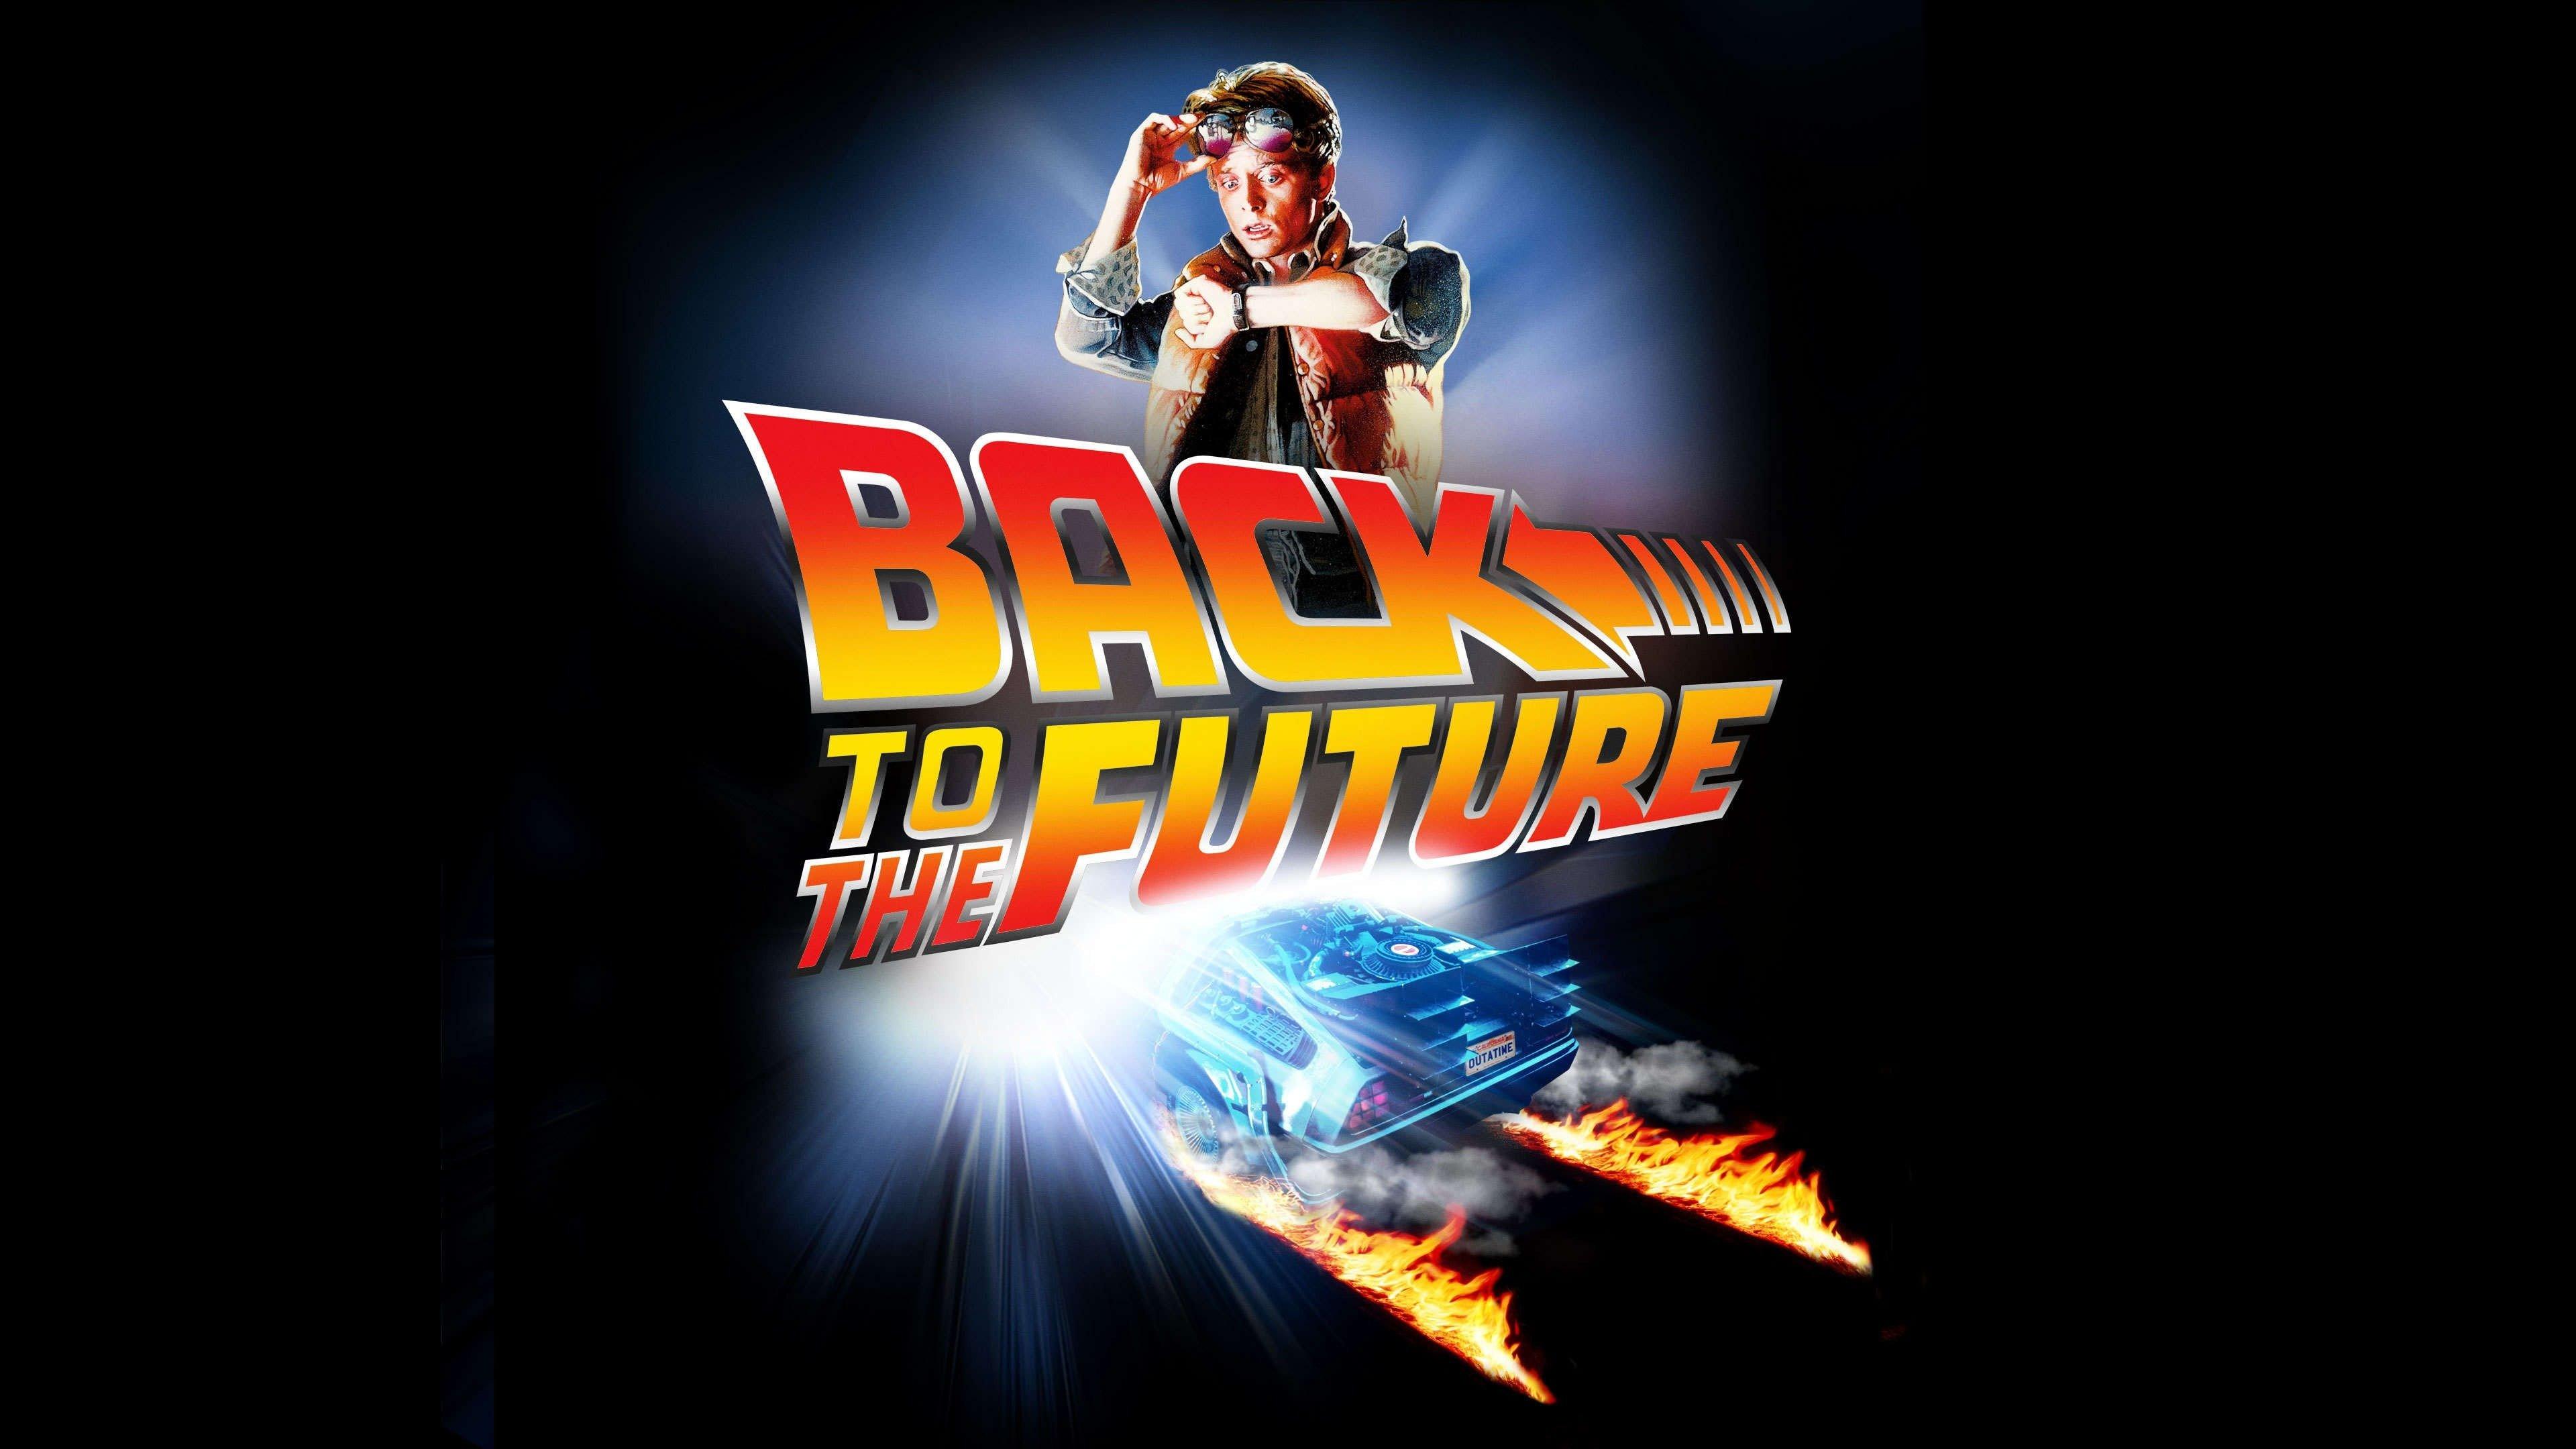 Watch Back to the Future Streaming Online on Philo (Free Trial)